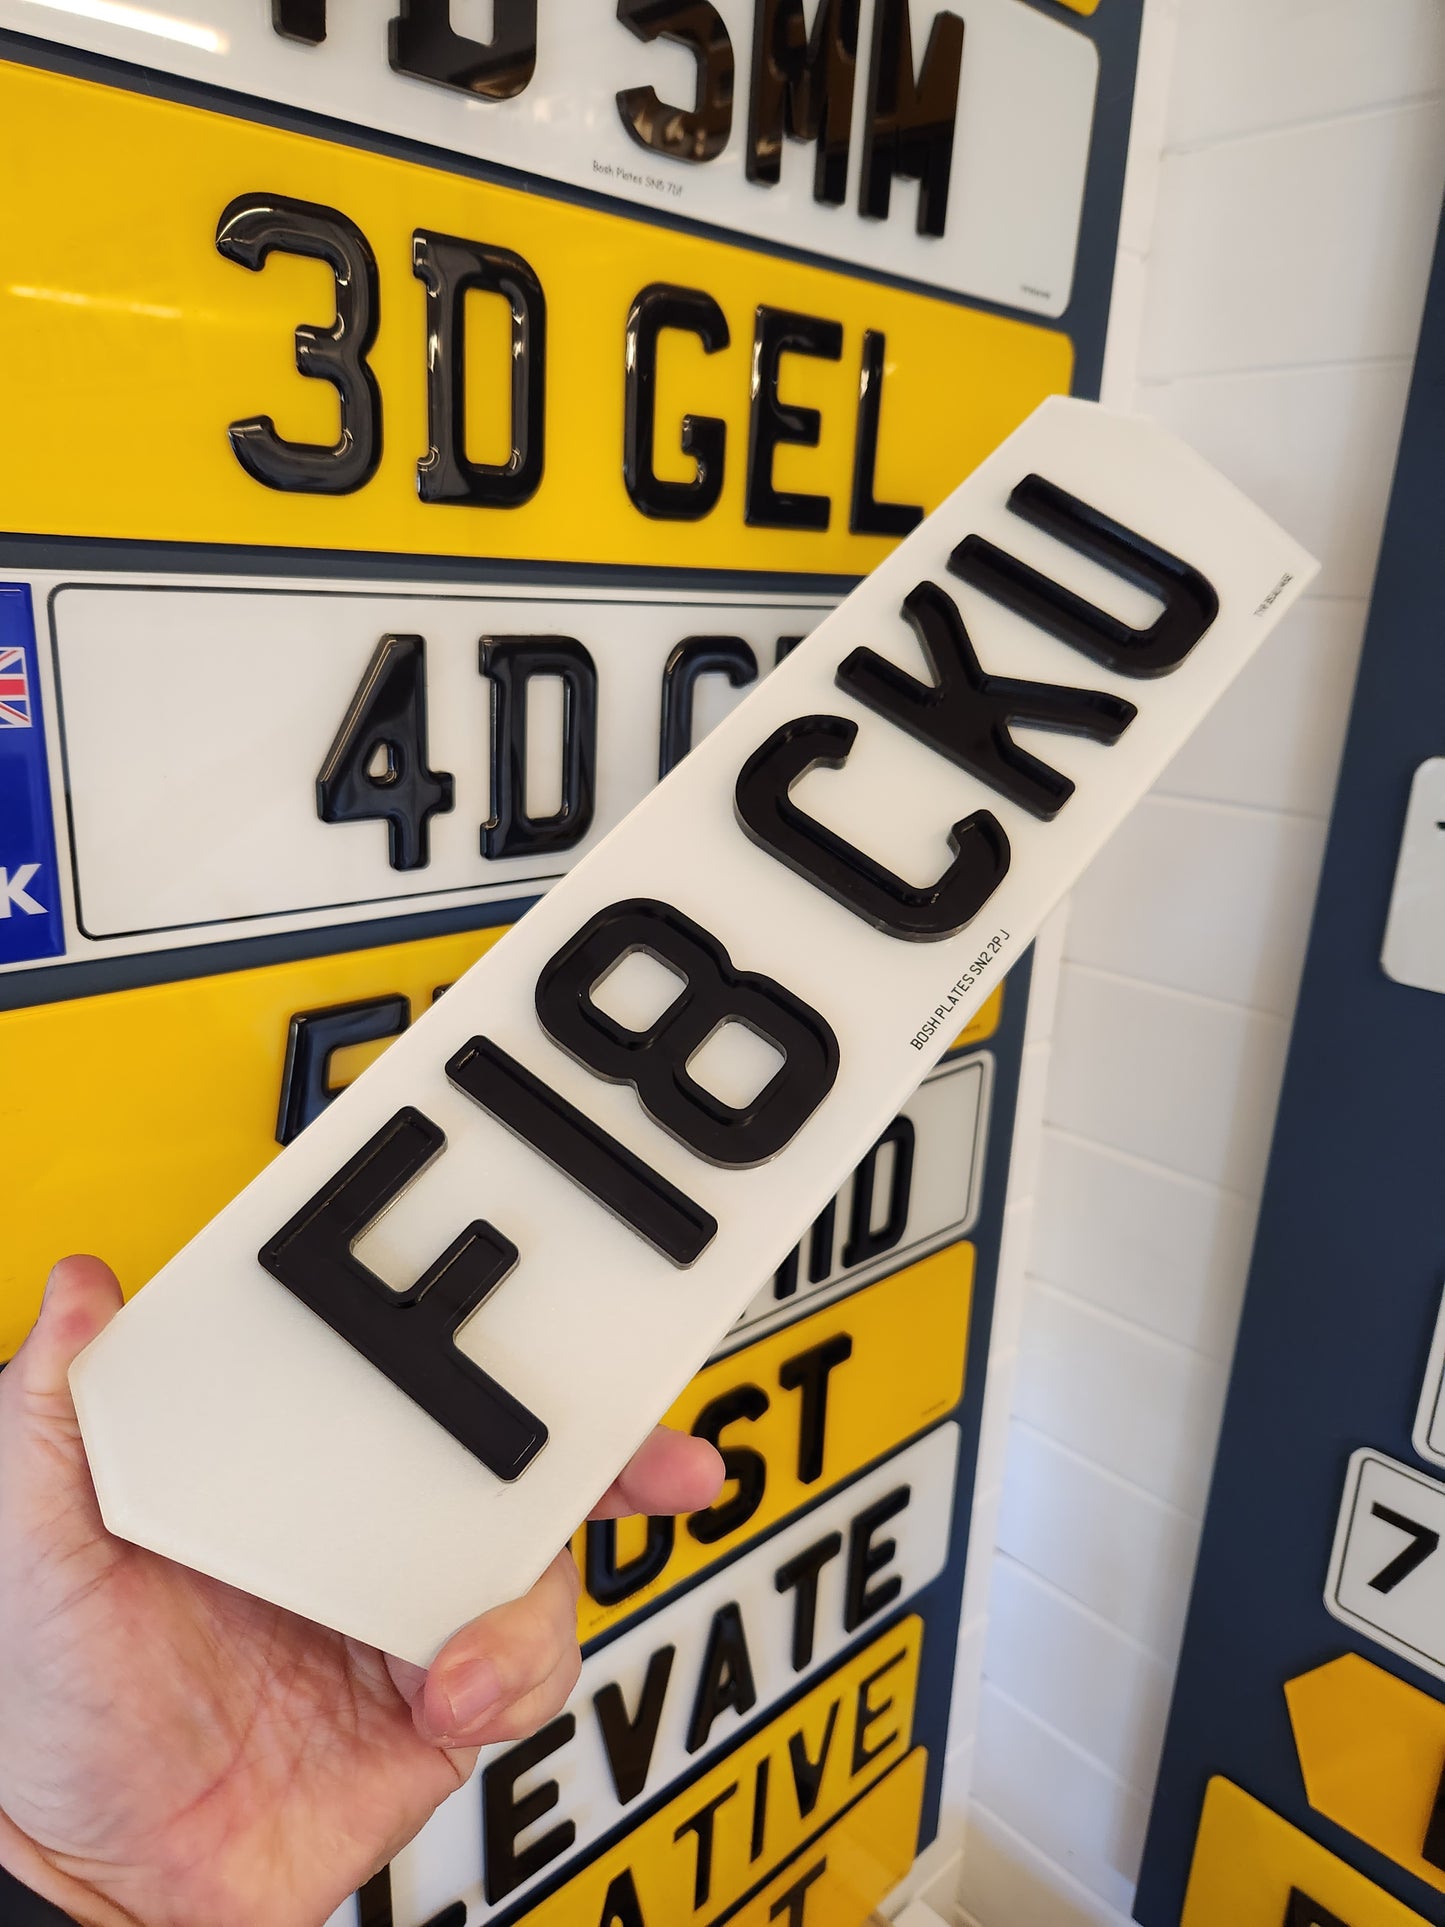 4D Ghost Number Plates